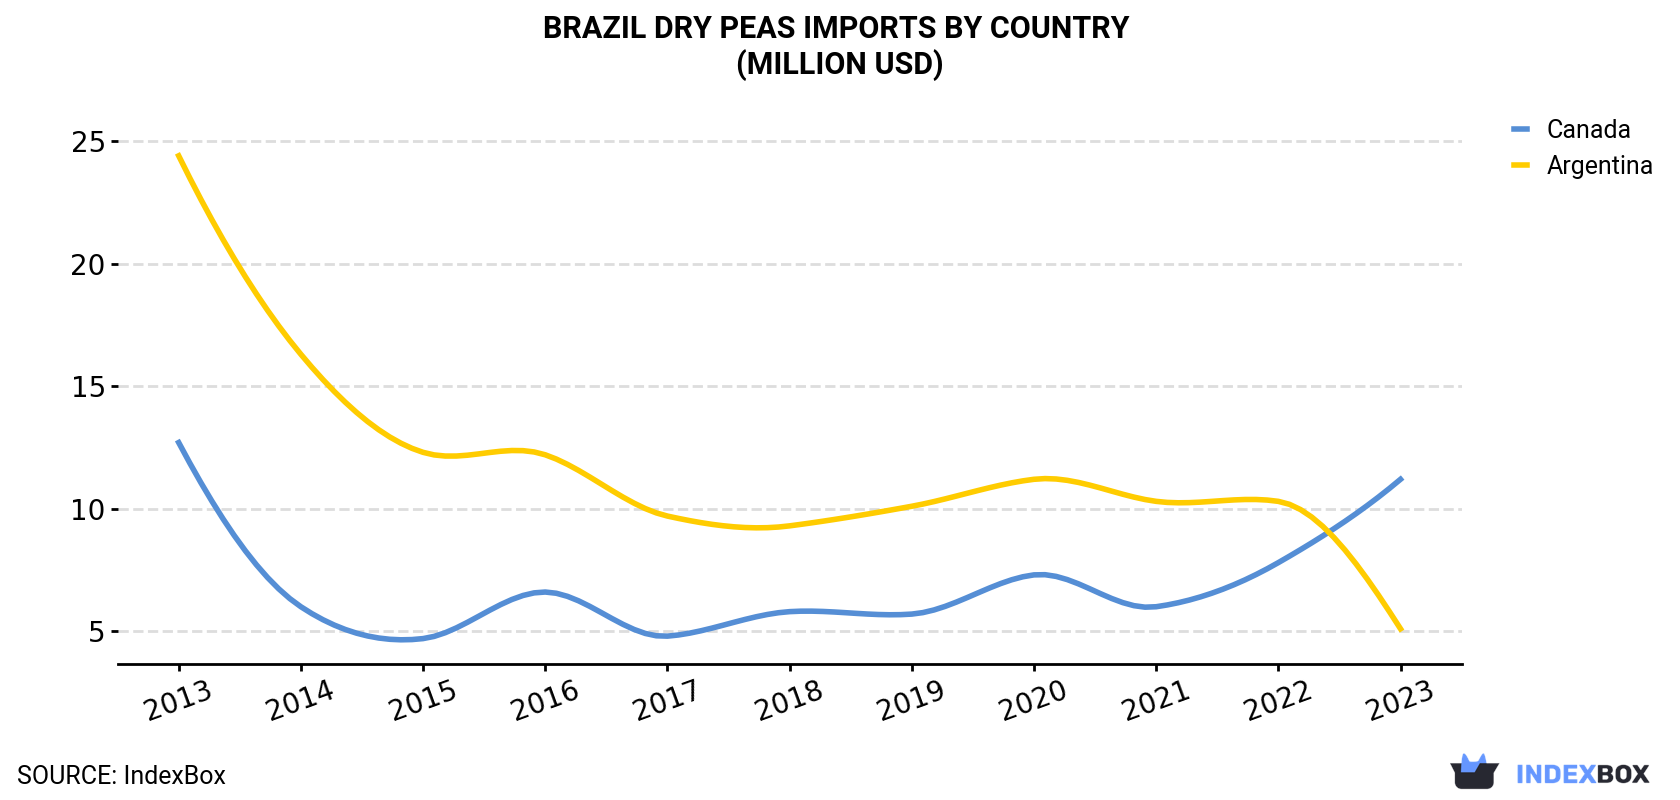 Brazil Dry Peas Imports By Country (Million USD)